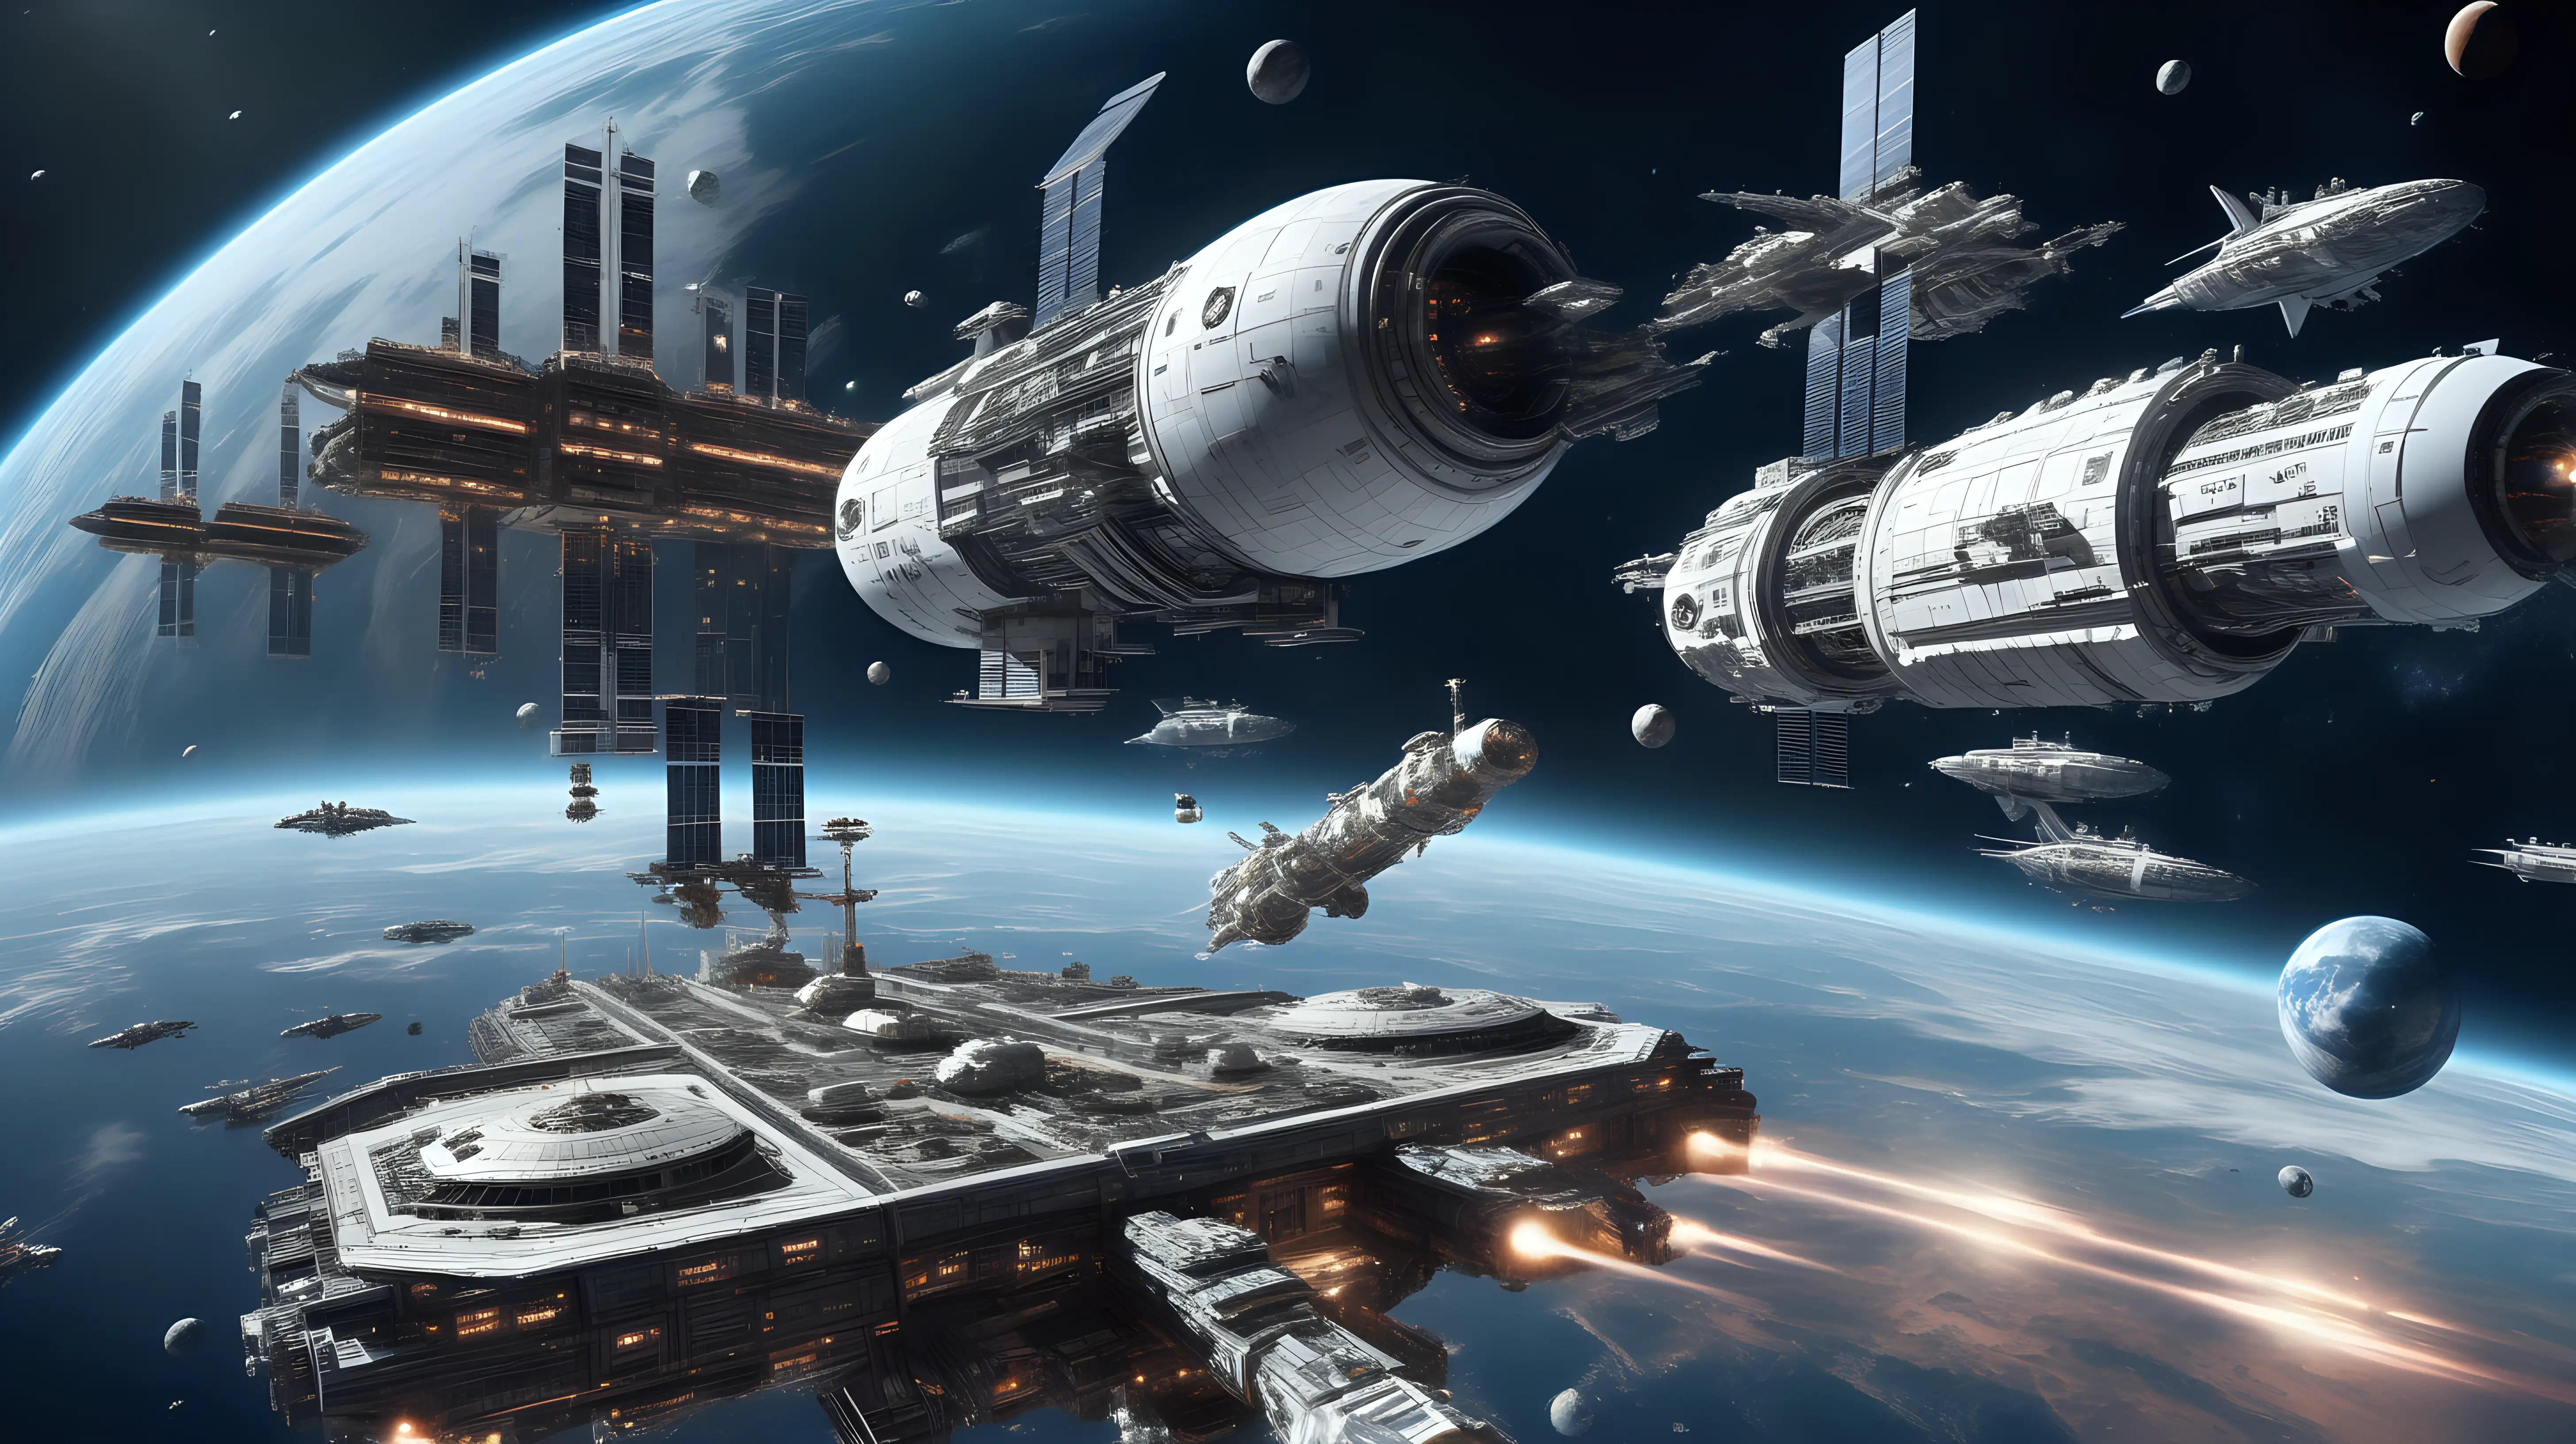 ultra-realistic high resolution and highly detailed image of an armada of space ships approaching a heavily fortified colossal space station.